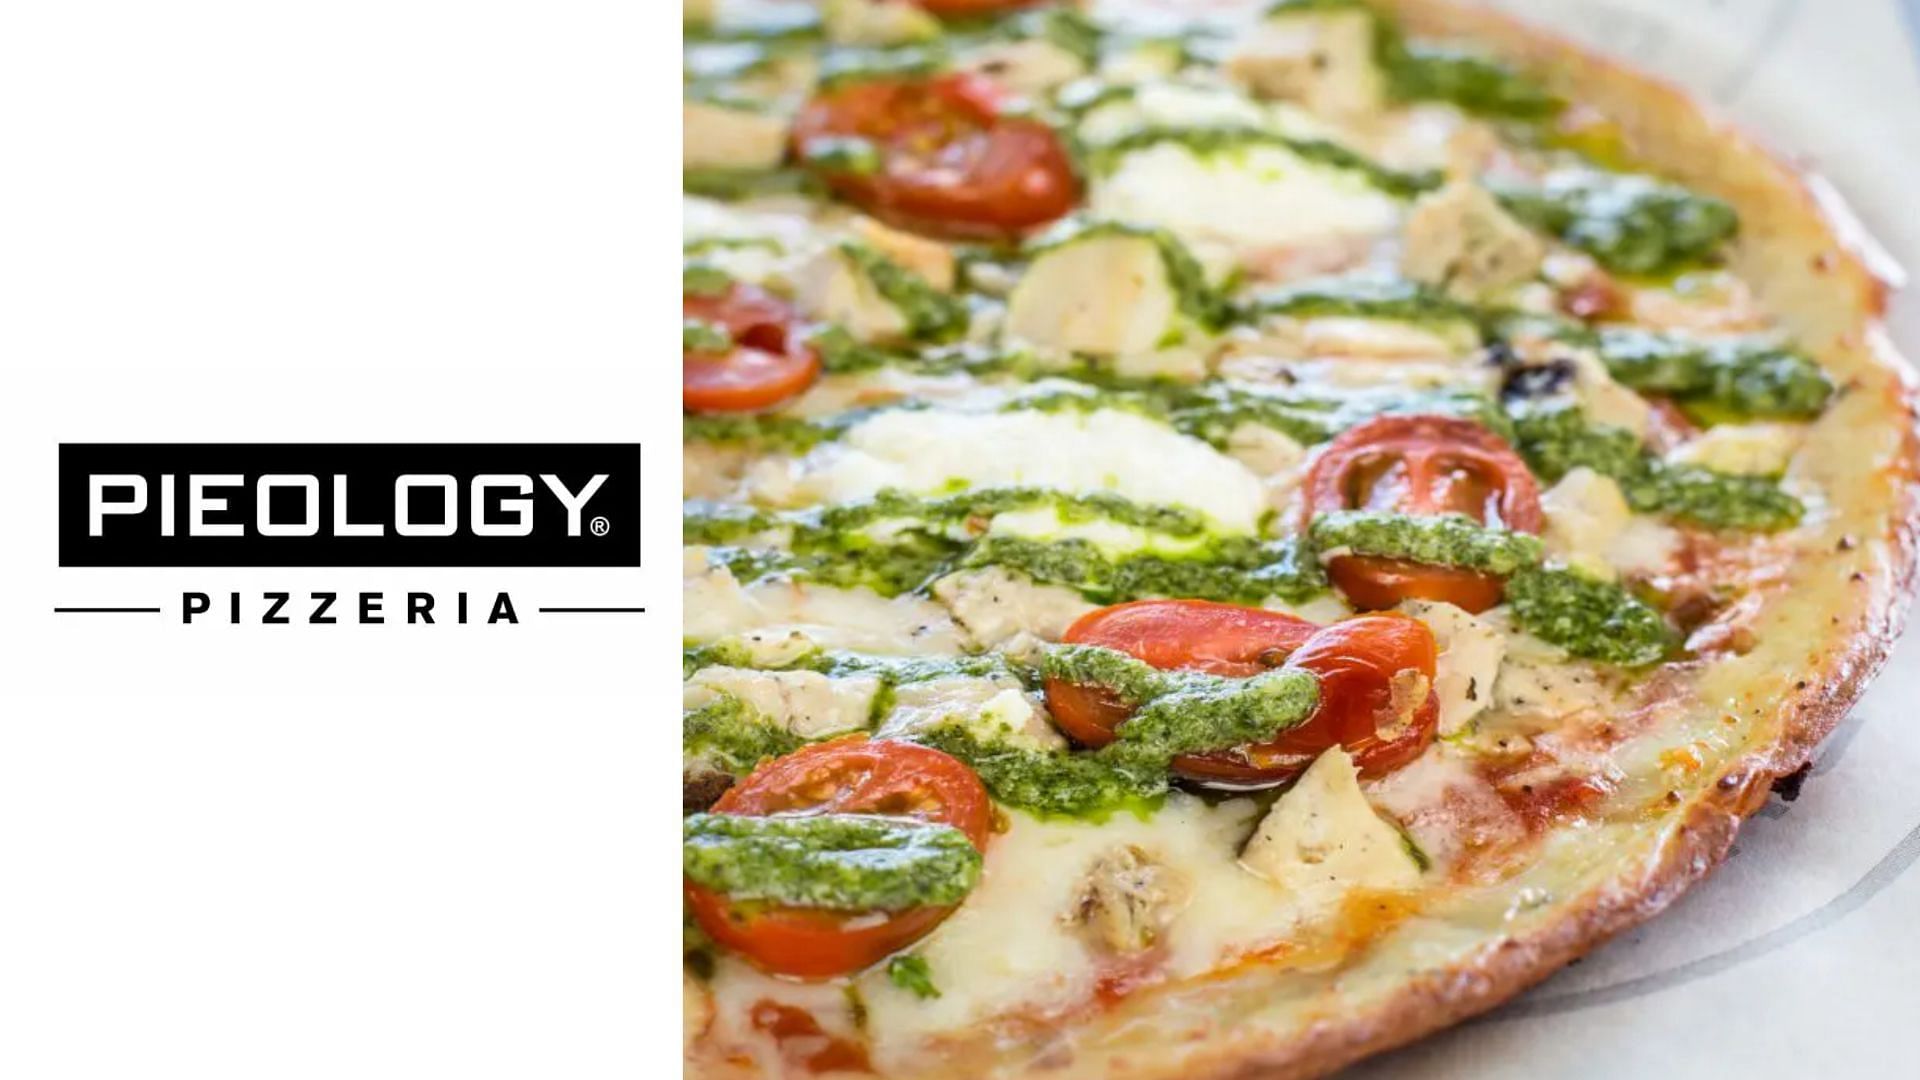 Pieology launches 12 days of Pie-oliday (Image via Pieology)